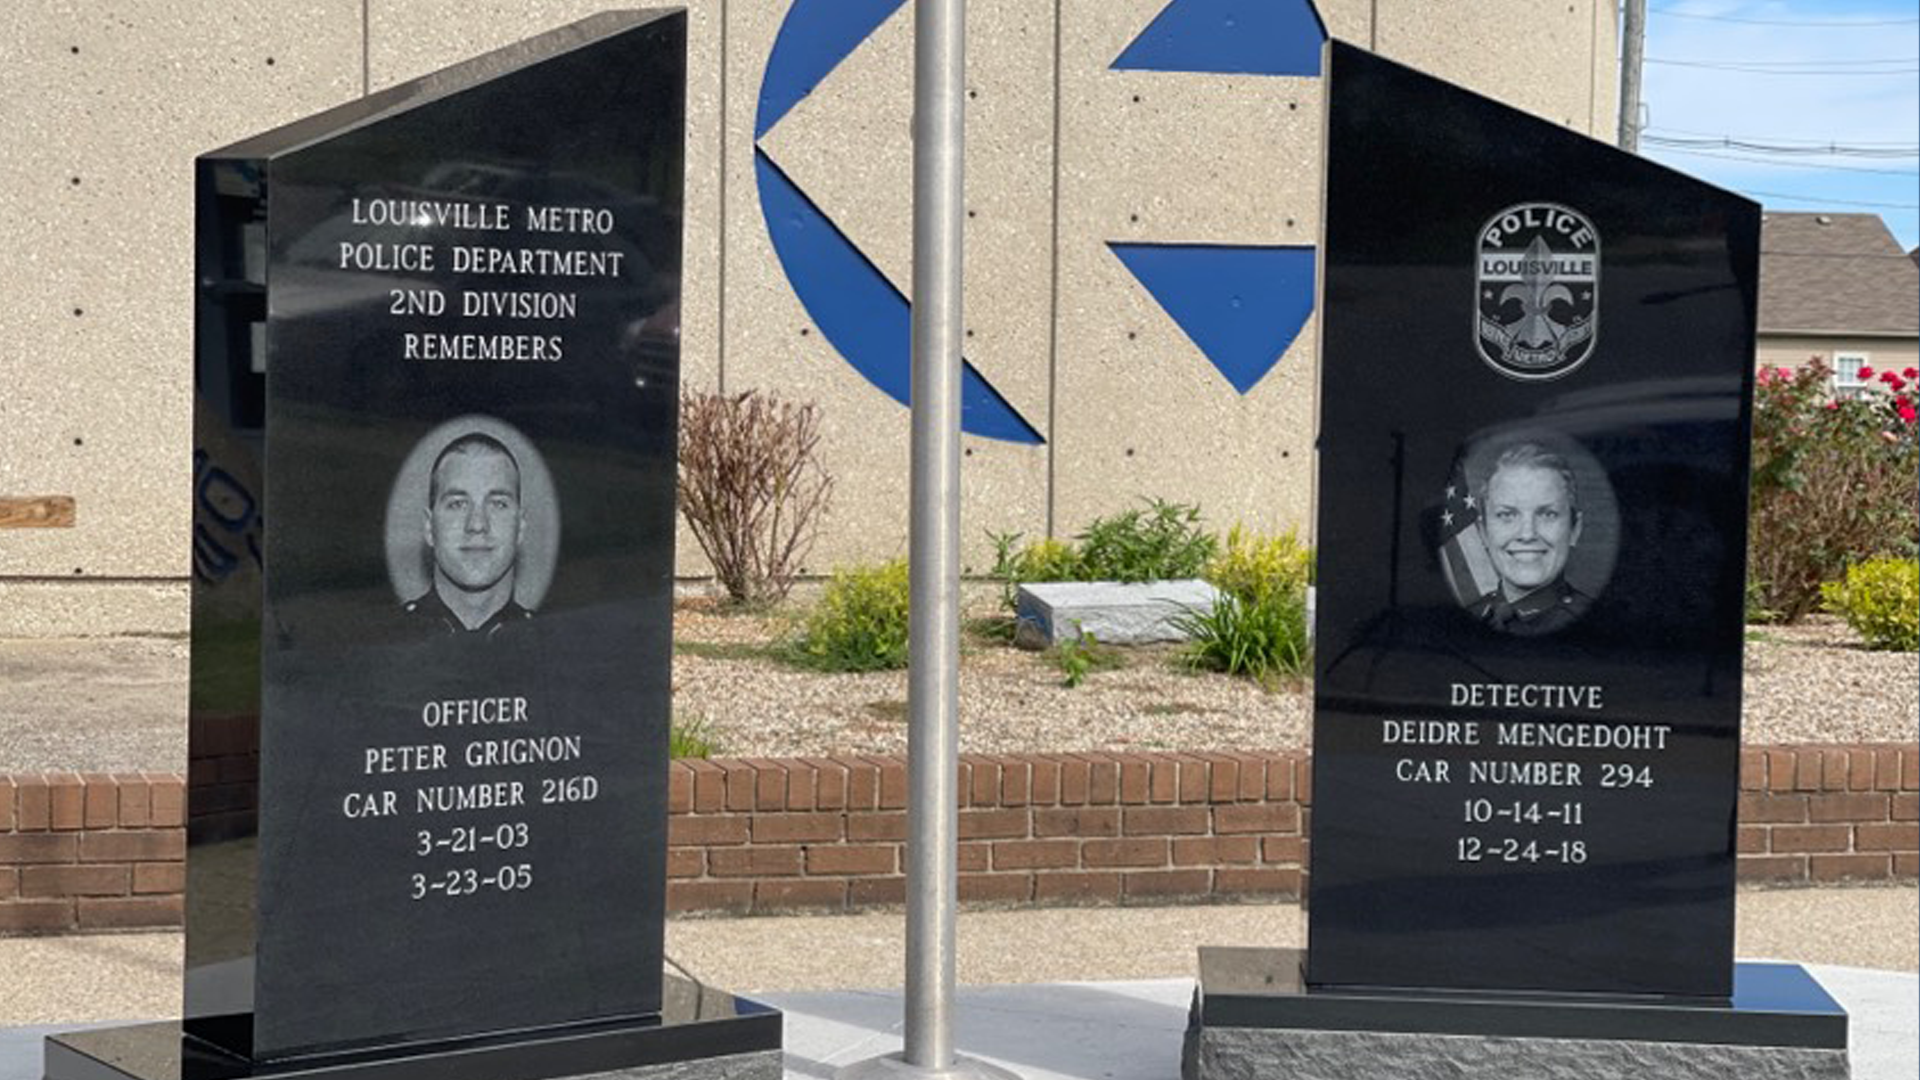 The memorials honors Officer Peter Grignon and Detective Deidre Mengedoht are located outside LMPD's second division.